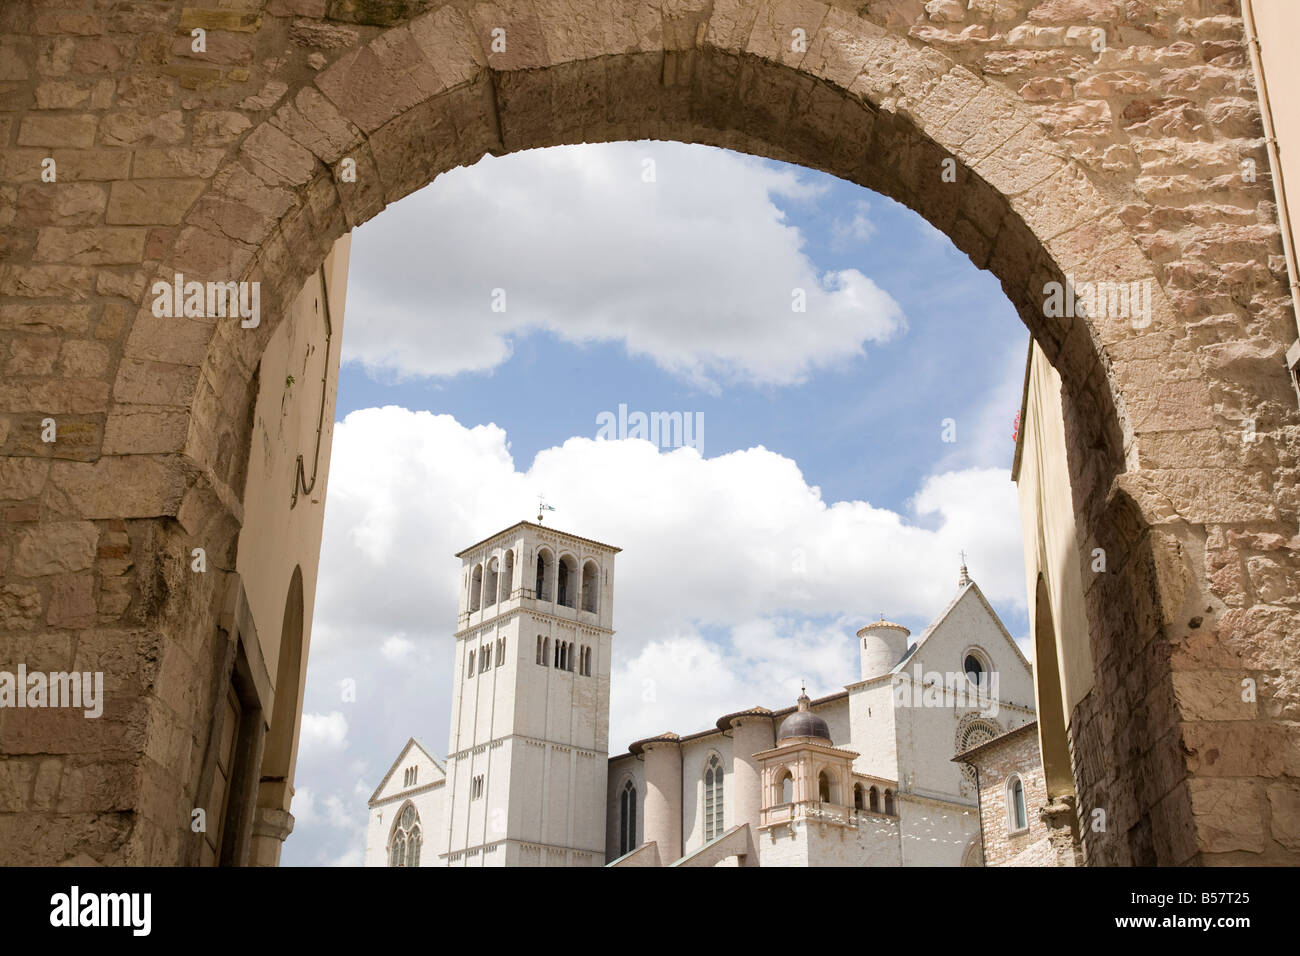 The New Gate Assisi and view of the Franciscan Basilica, UNESCO World Heritage Site, Assisi, Umbria, Italy, Europe Stock Photo